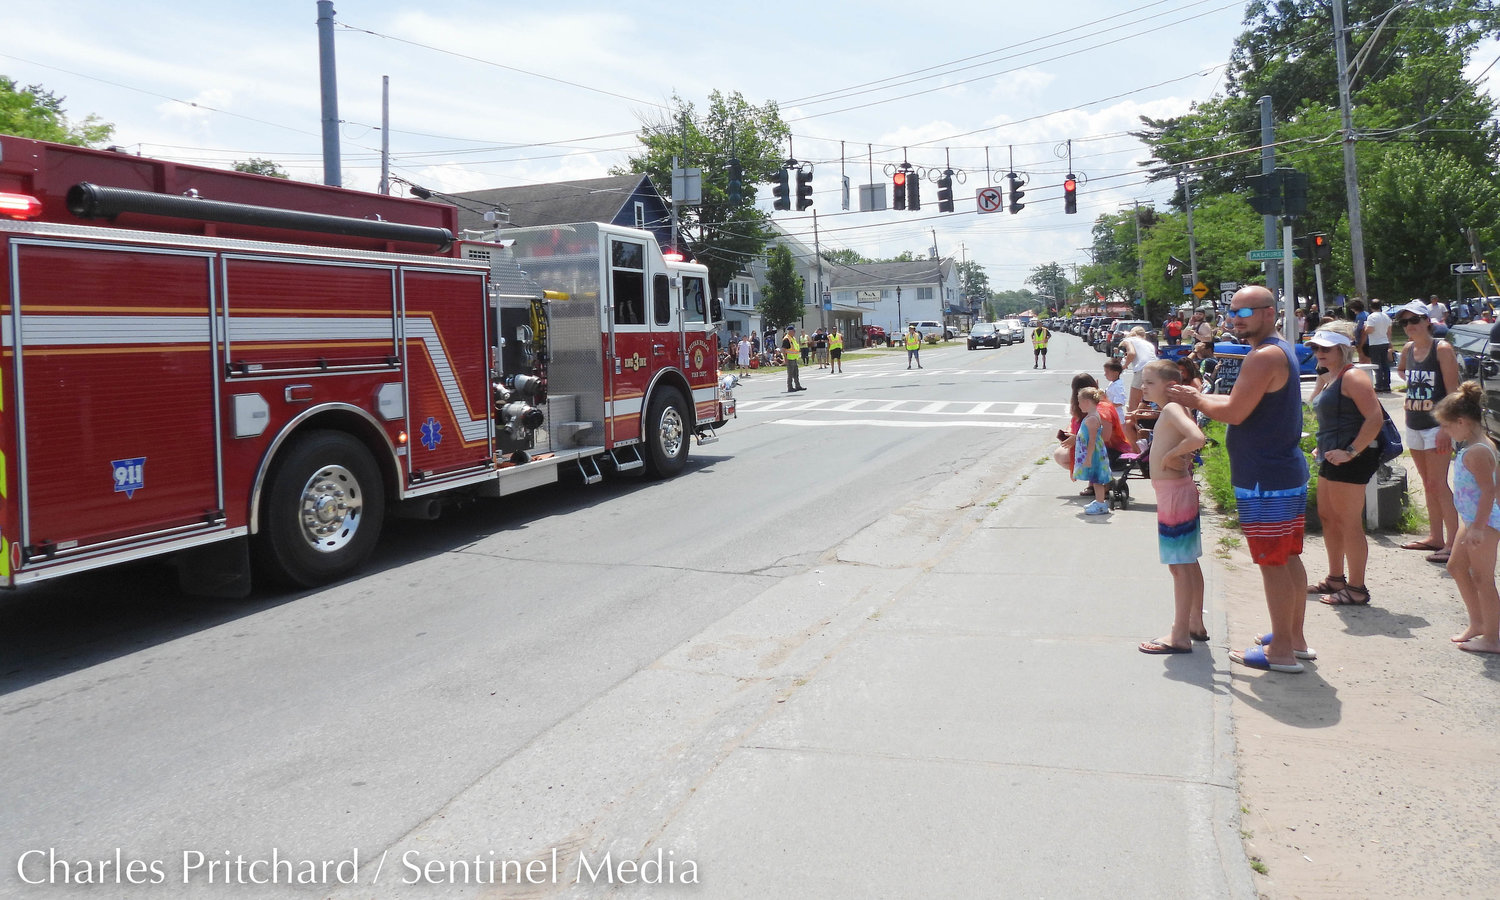 The Sylvan Beach Pirate's Parade makes its way down Main Street. Pictured is one of the Sylvan Beach Fire Department's fire engines, blaring its siren for the parade.